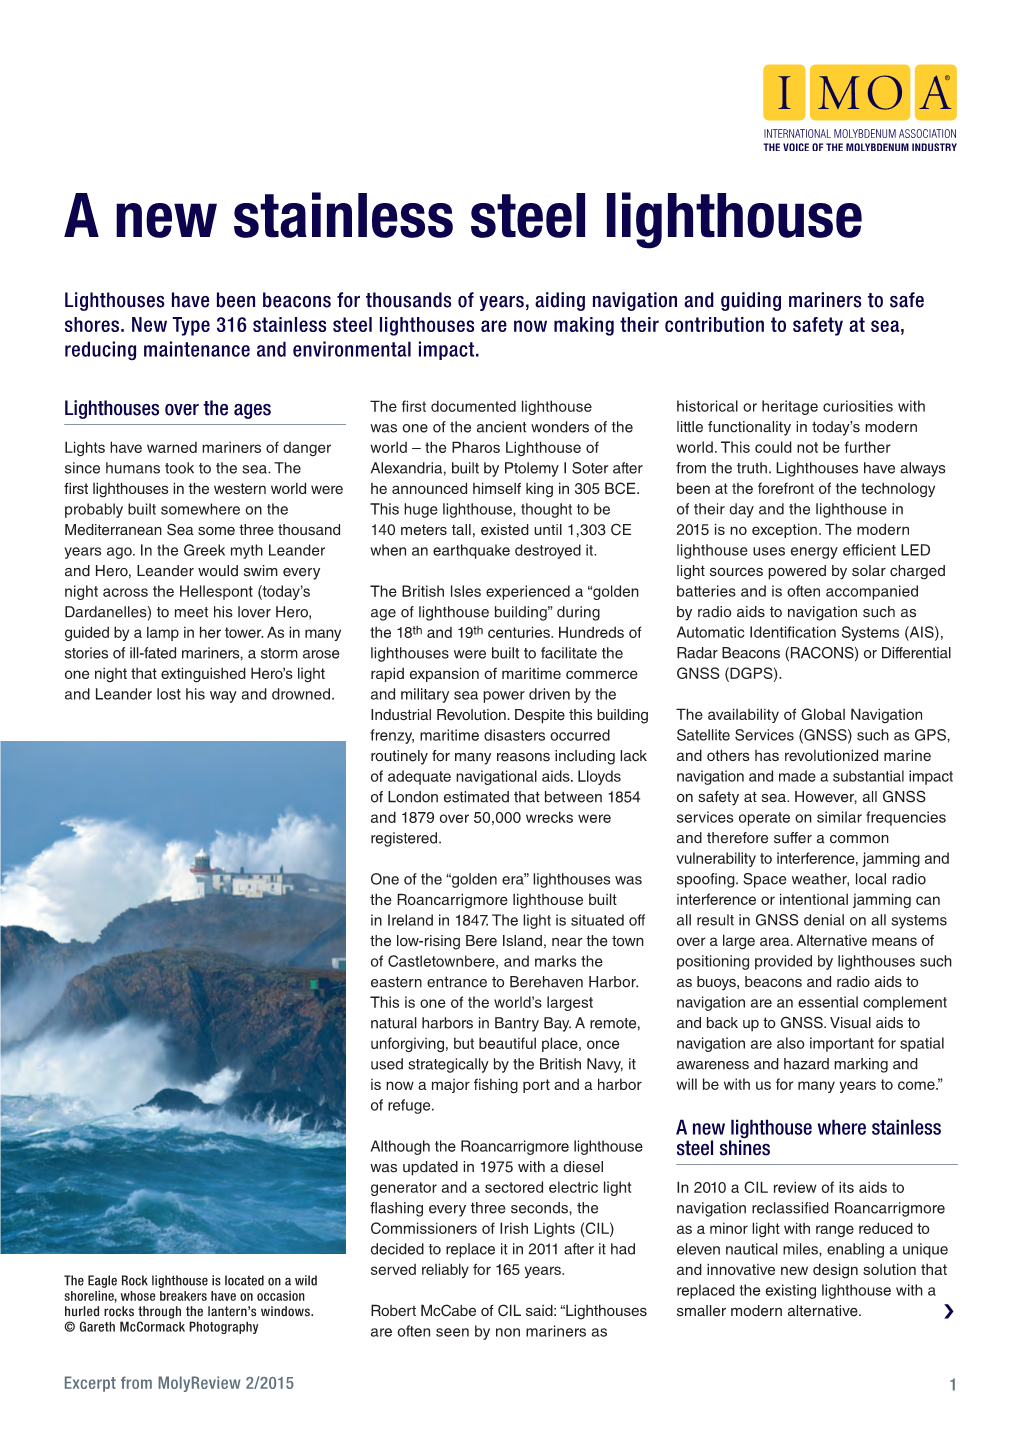 A New Stainless Steel Lighthouse